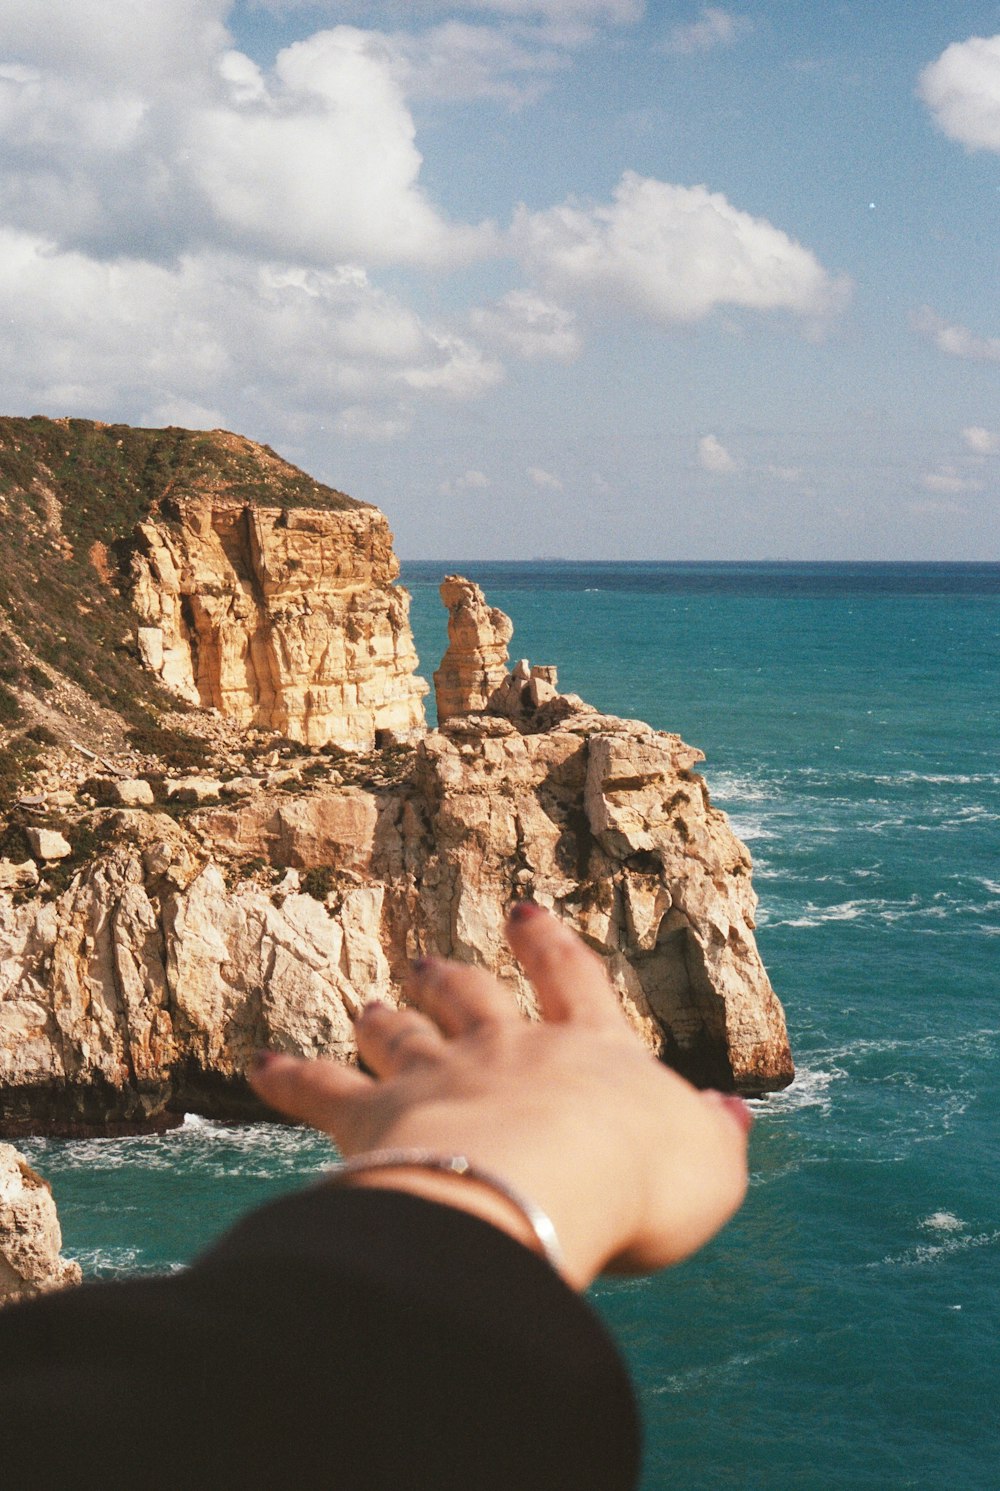 a person reaching out to the ocean from a cliff